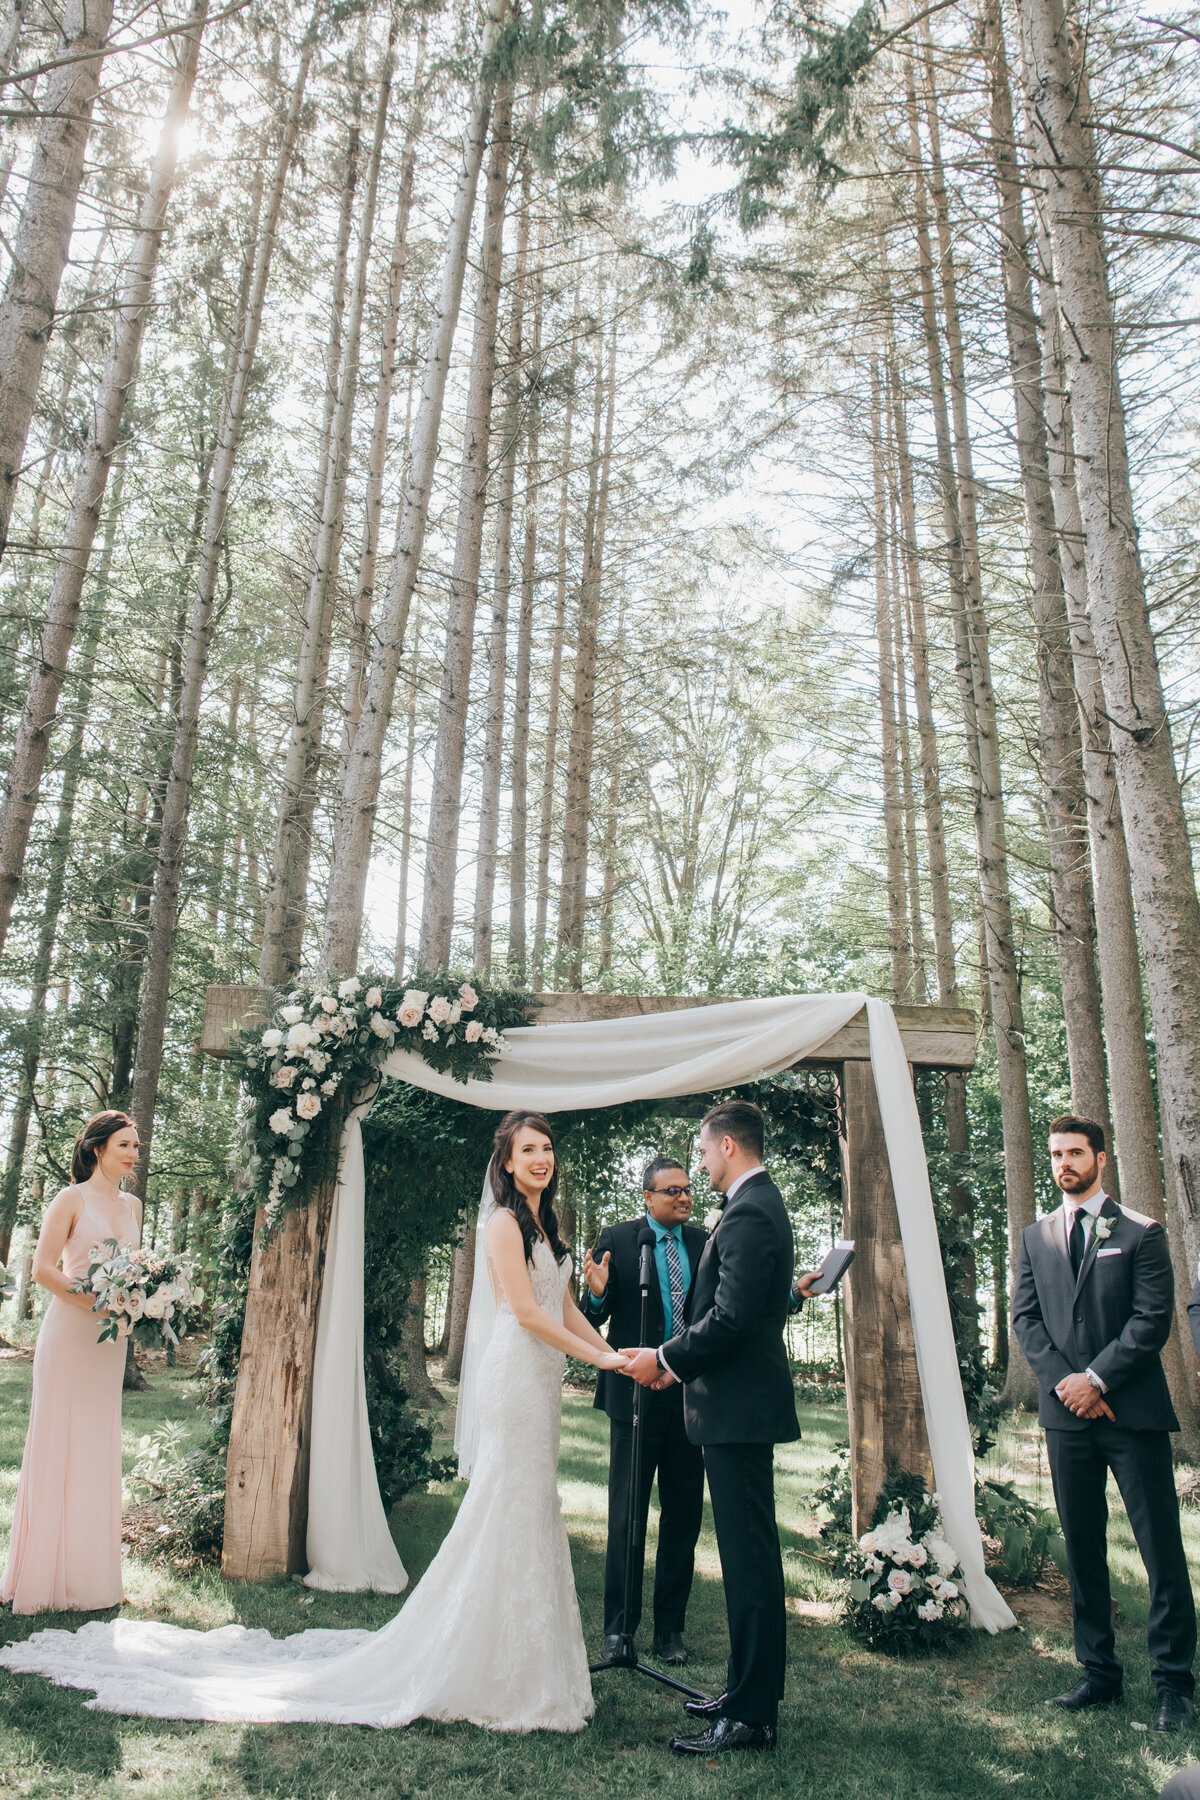 Bride and groom during their romantic forest wedding ceremony